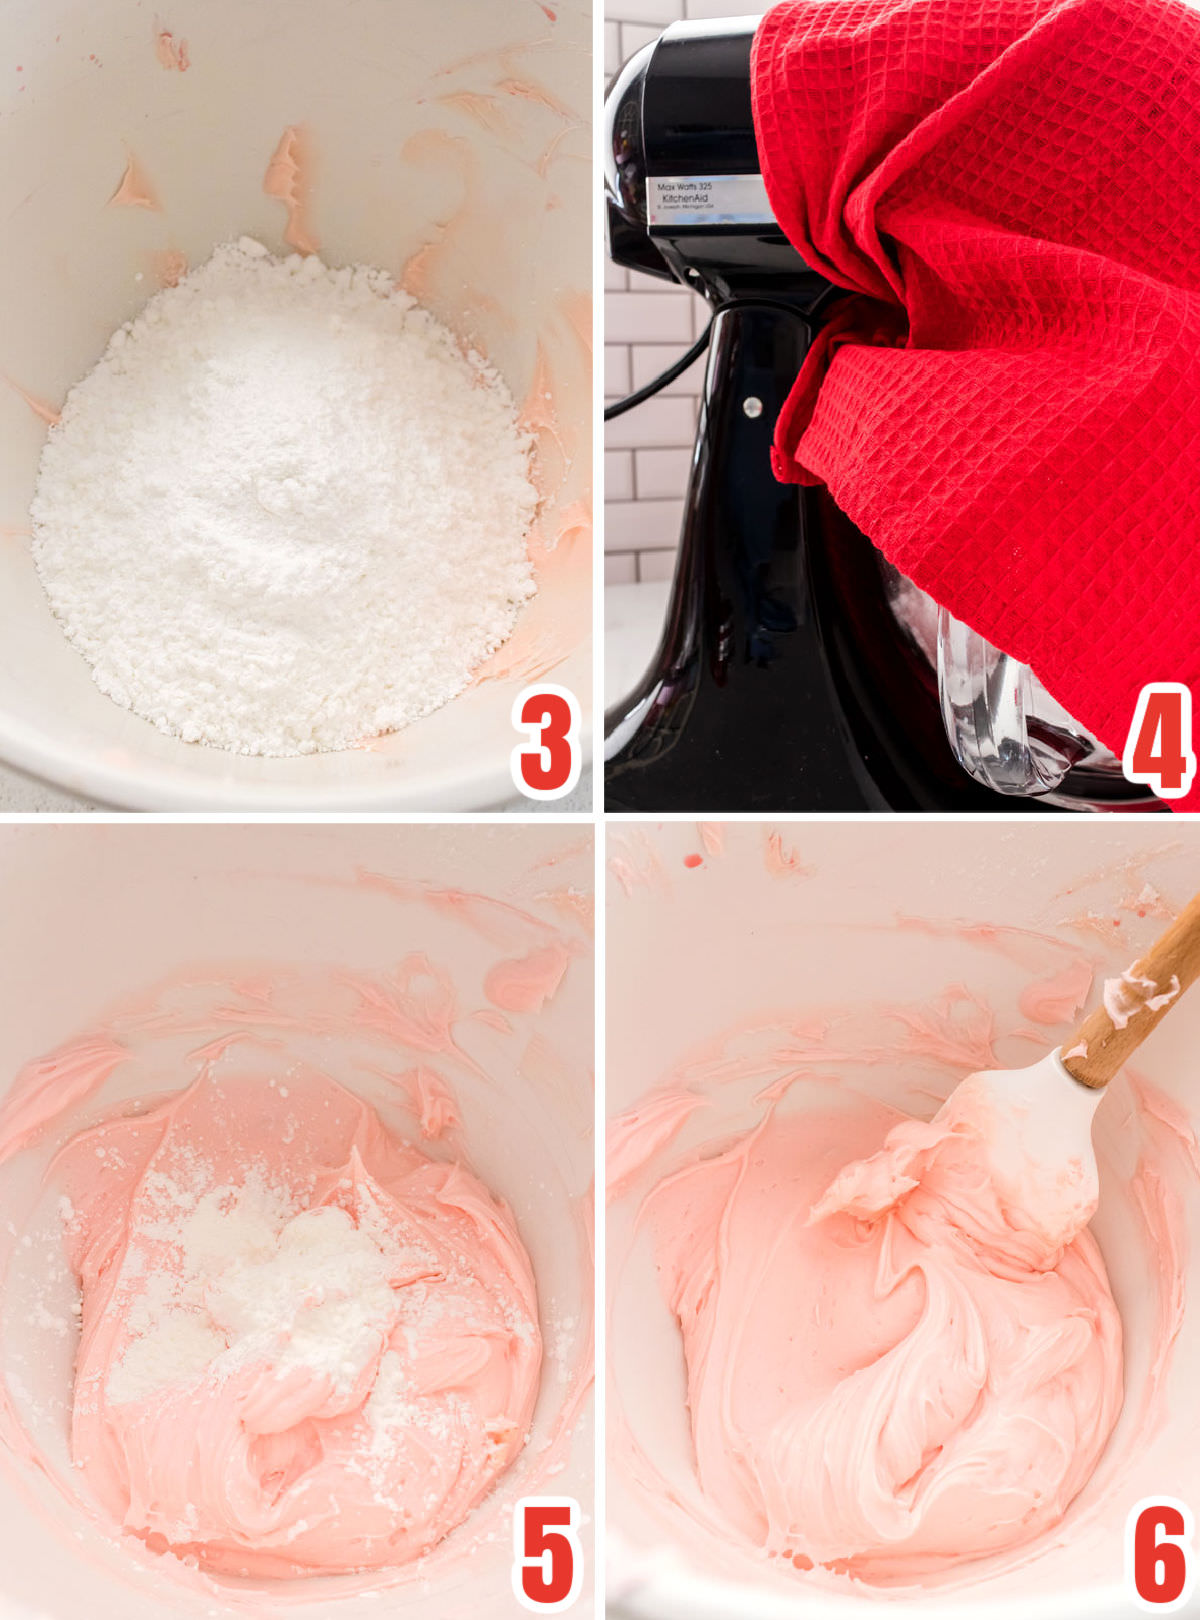 Collage image showing how to add the powdered sugar to the Cherry icing recipe.